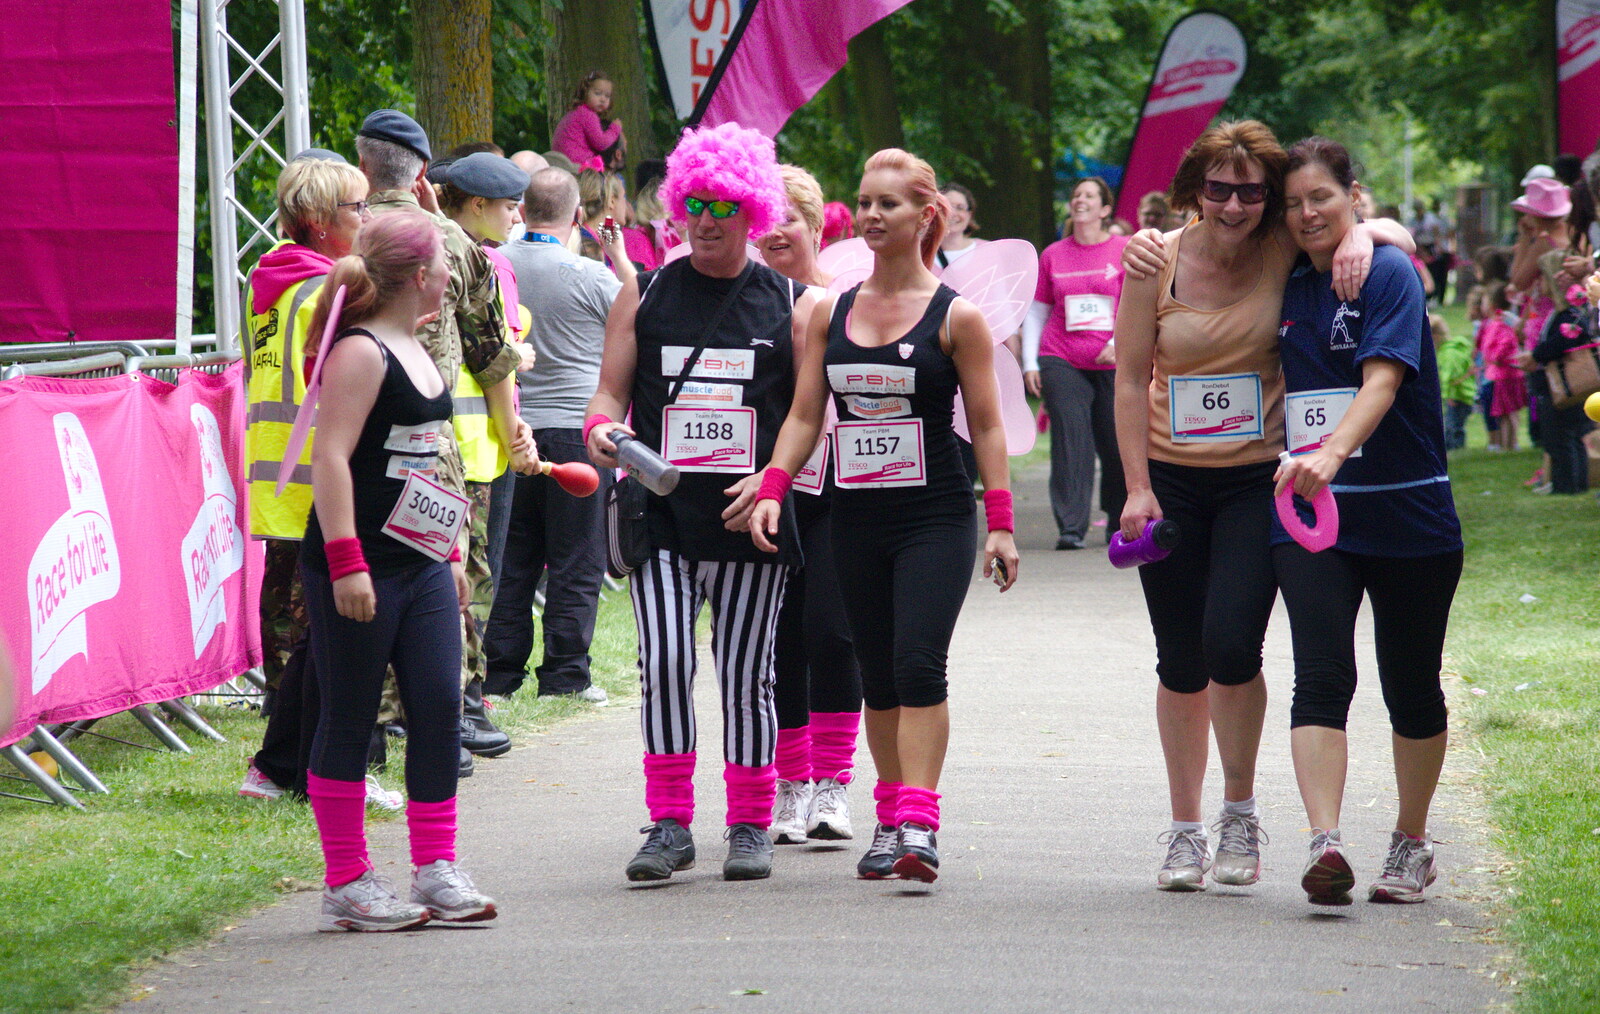 The pink wig comes in from Isobel's Race For Life, Chantry Park, Ipswich - 11th June 2014